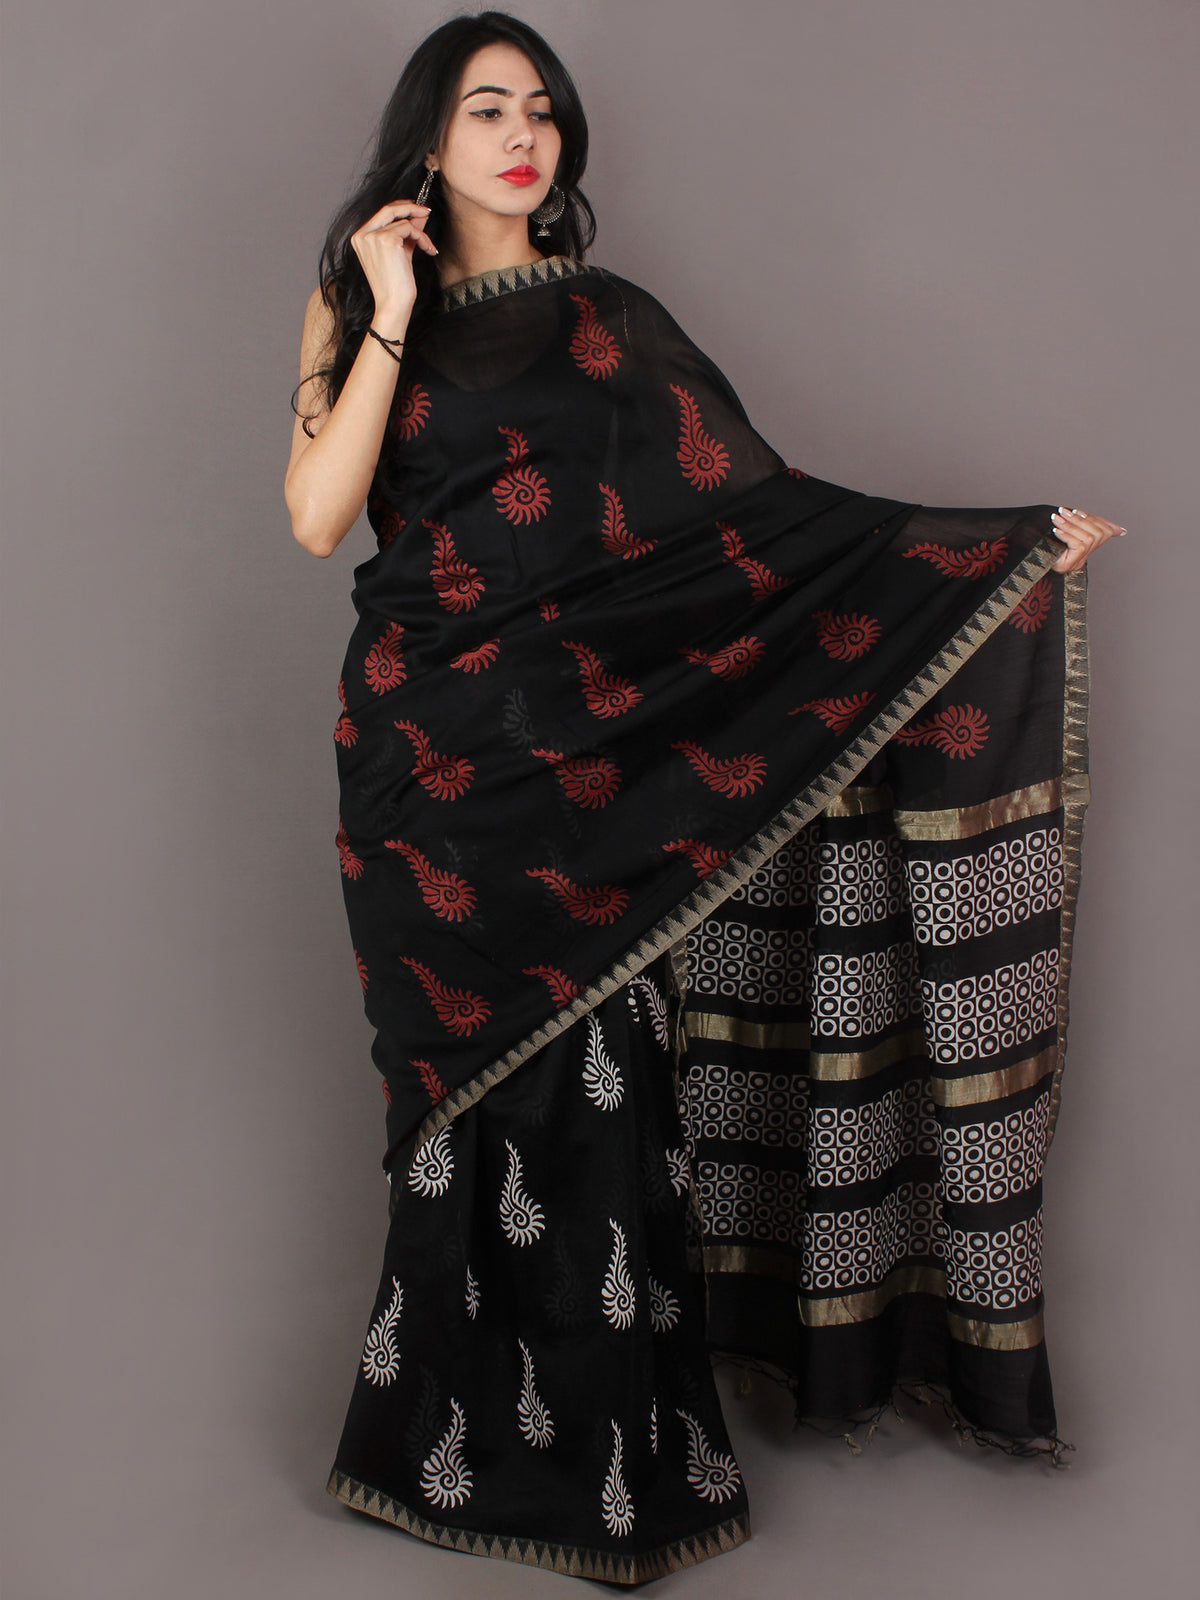 Black Red White Hand Block Printed in Natural Vegetable Colors Chanderi Saree With Geecha Border - S031701027